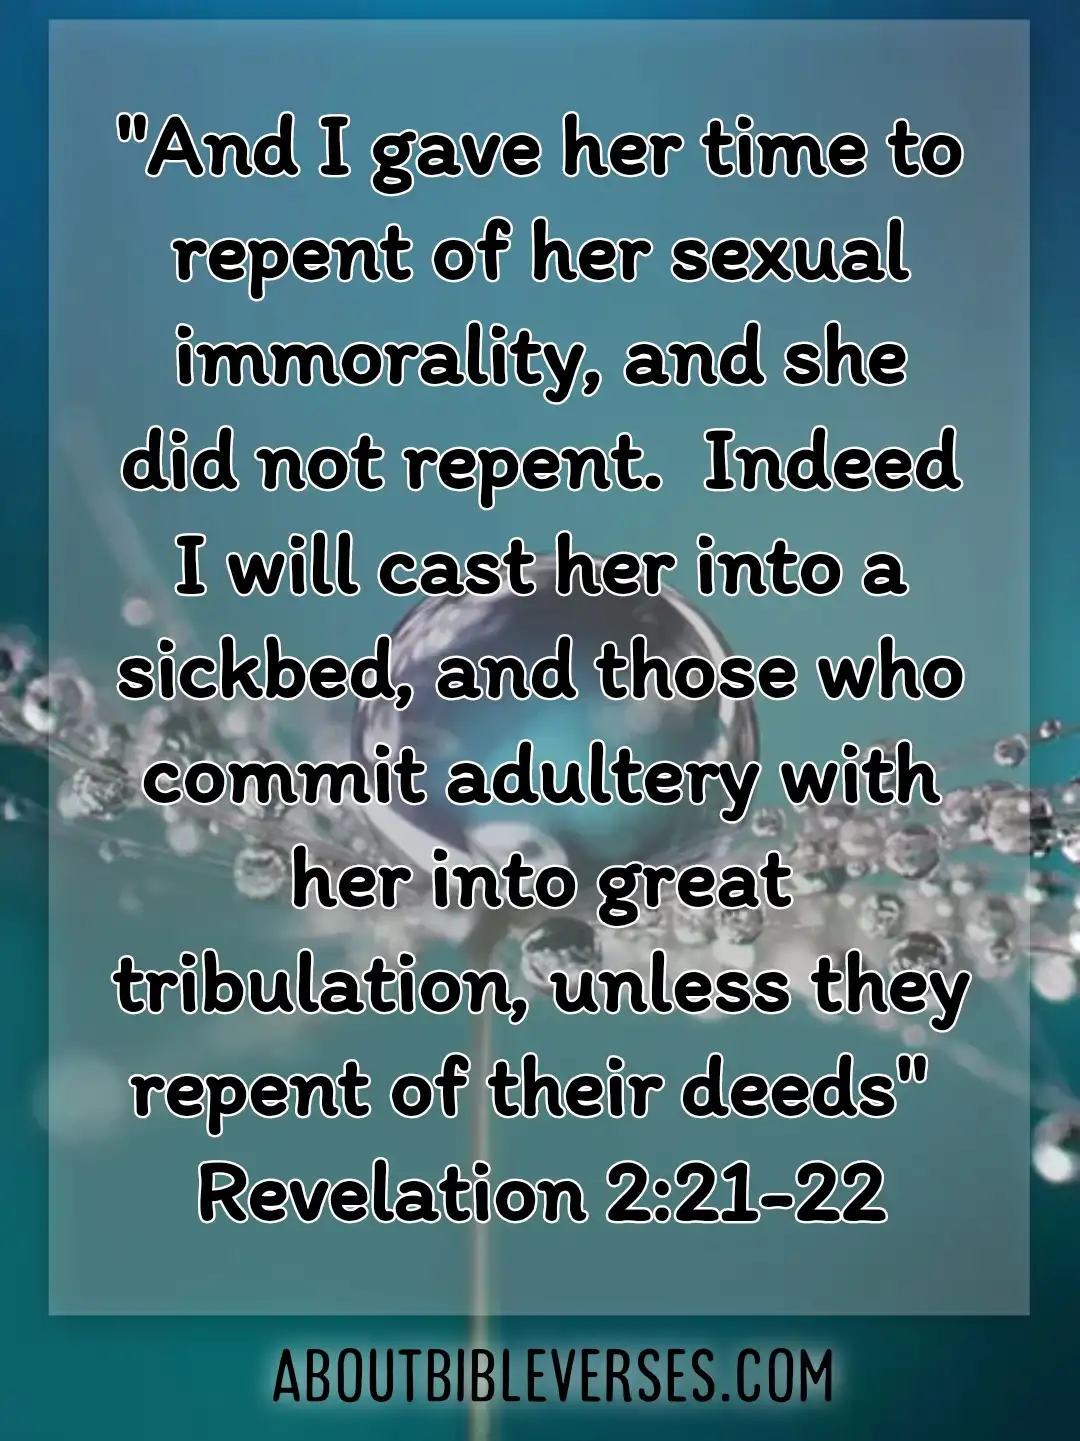 bible verses about repentance (Revelation 2:21-22)